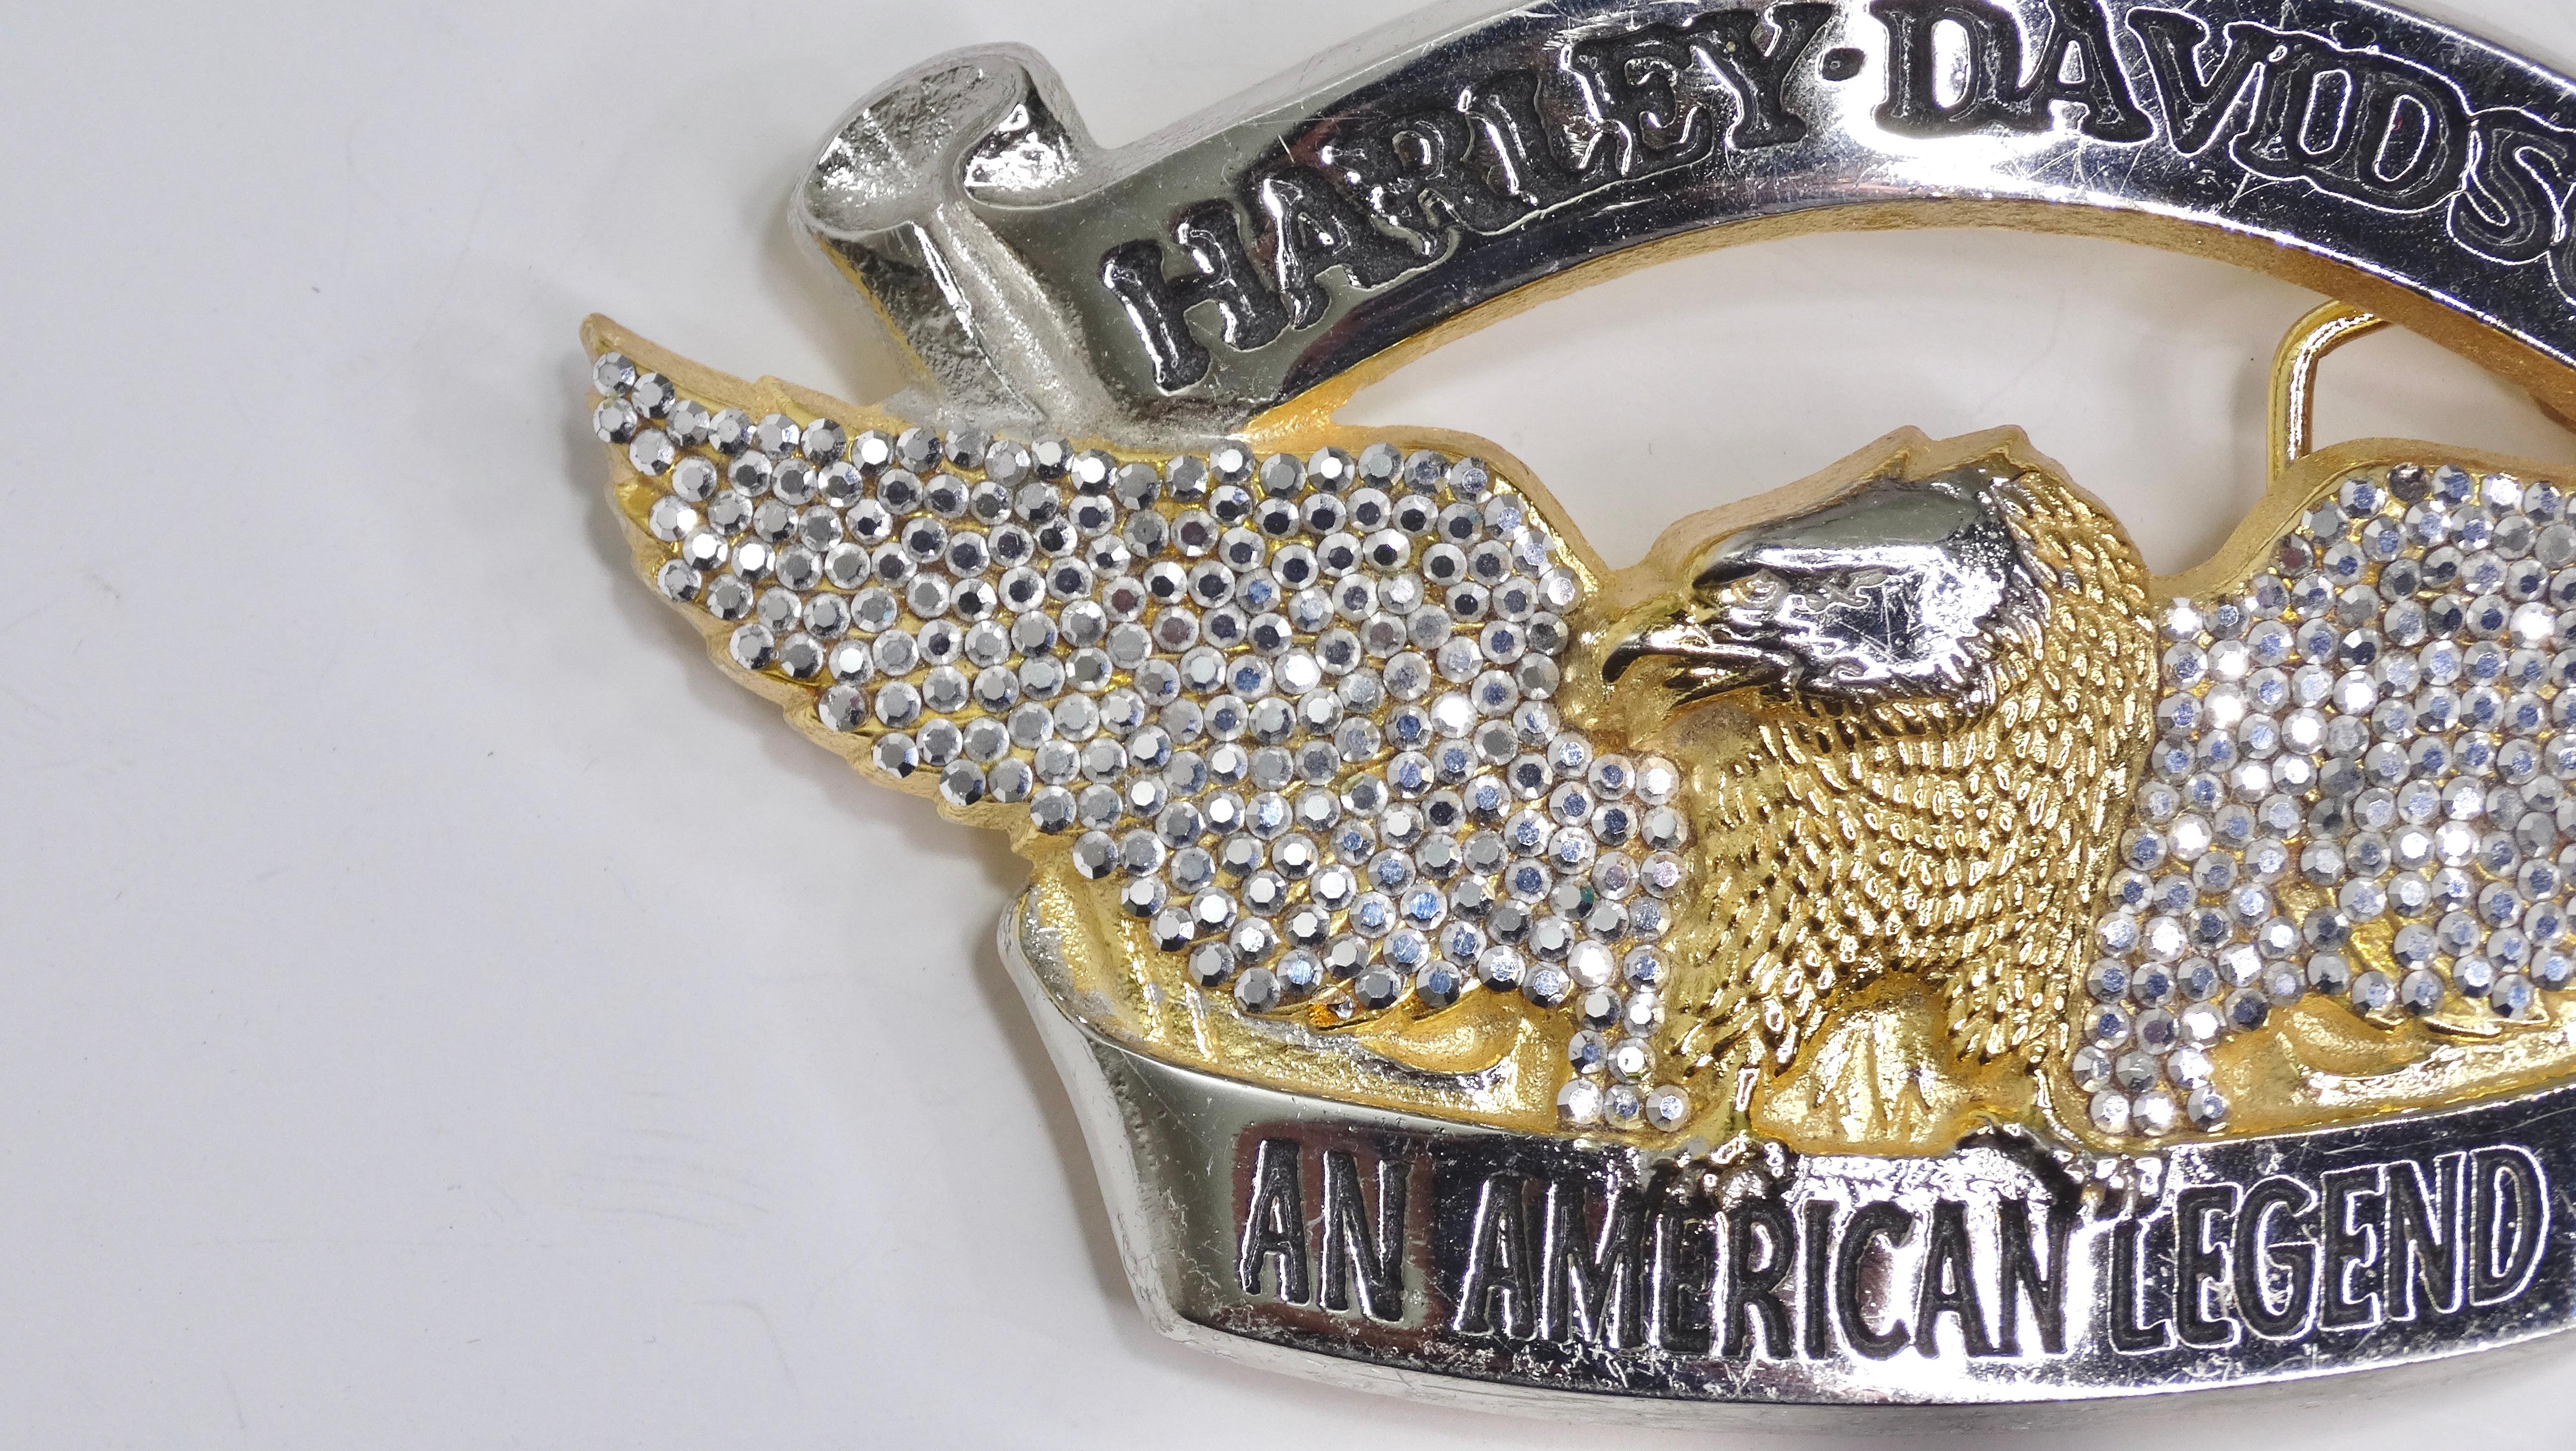 Harley Davidson but make it GLAM! Catch someone's attention from across the room with this belt buckle that is adorned with crystals. Large in size, it depicts an eagle with crystalized wings and a banner on the top reading 'HARLEY DAVIDSON' and a